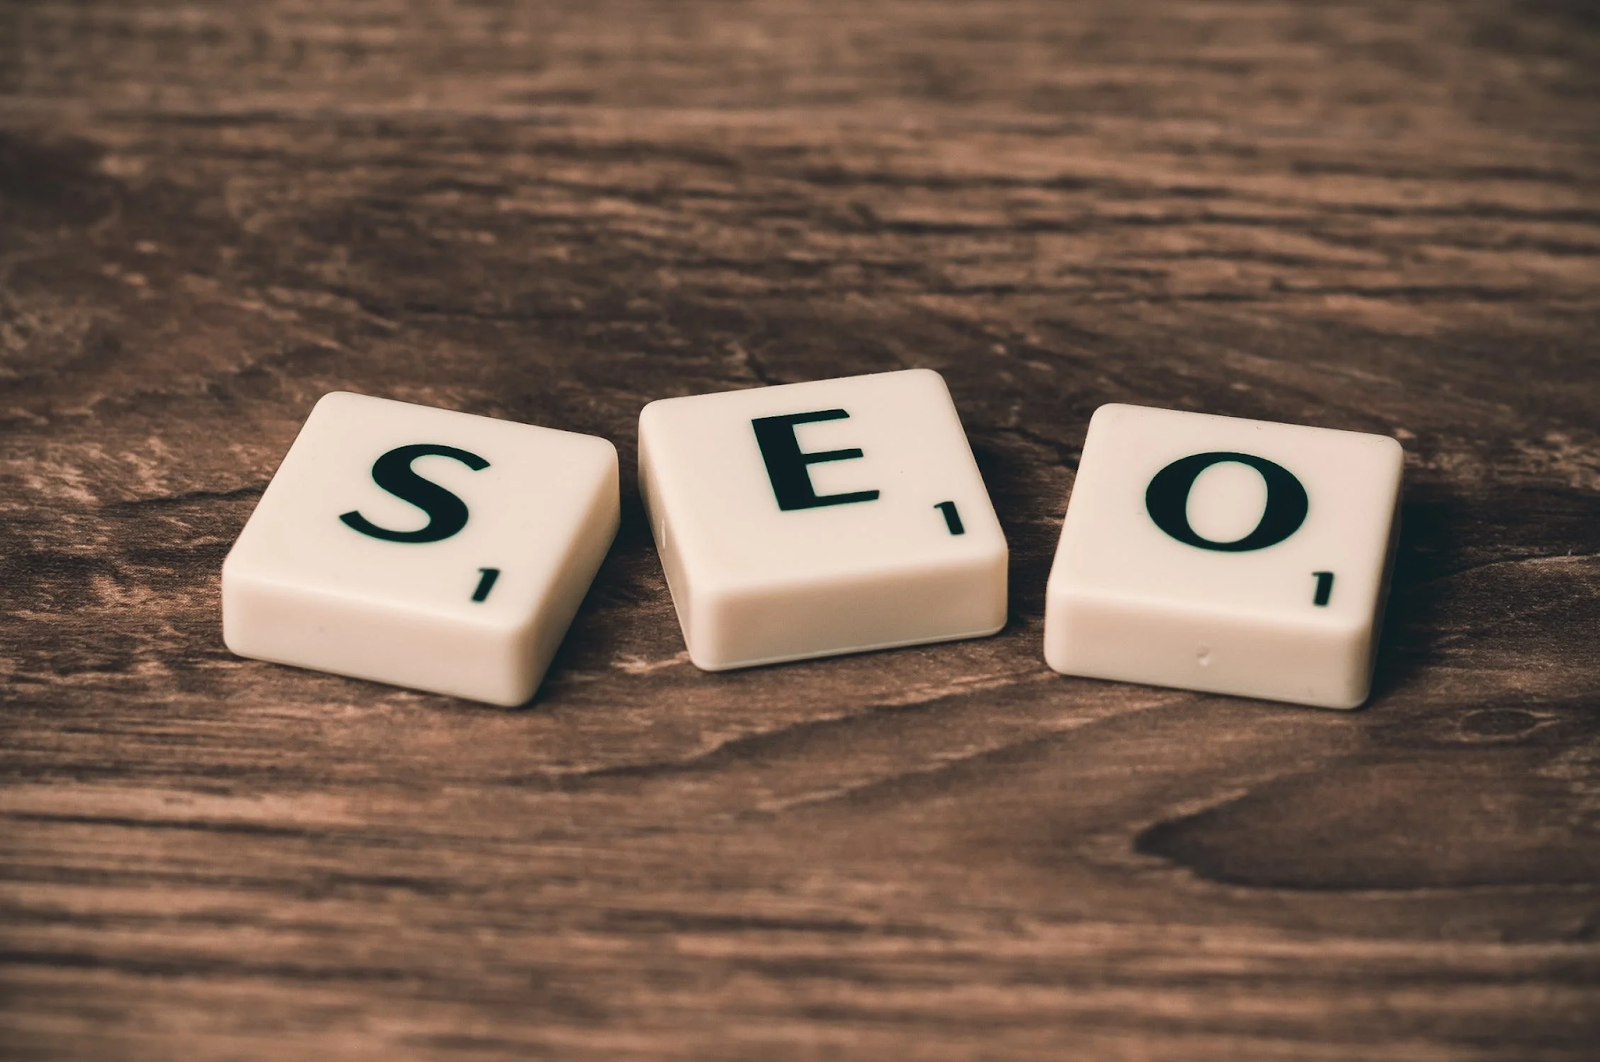 scrabble tiles spelling out "SEO" as SEO is crucial for your animation marketing framework